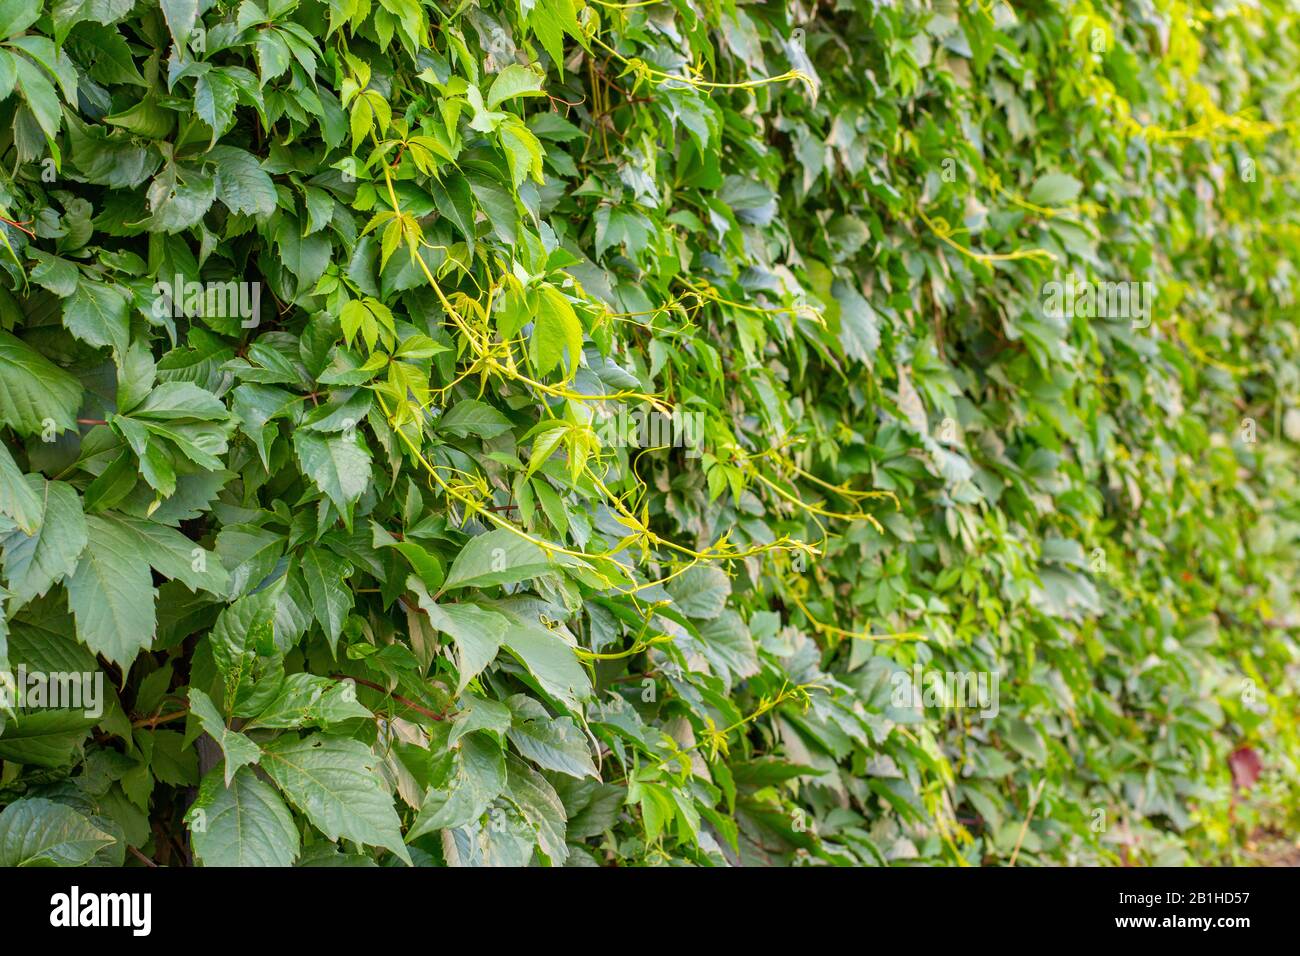 Parthenocissus inserta is a tree liana of the genus Maiden grape green foliage from North America. Greening the fence with pretending plants, backgrou Stock Photo